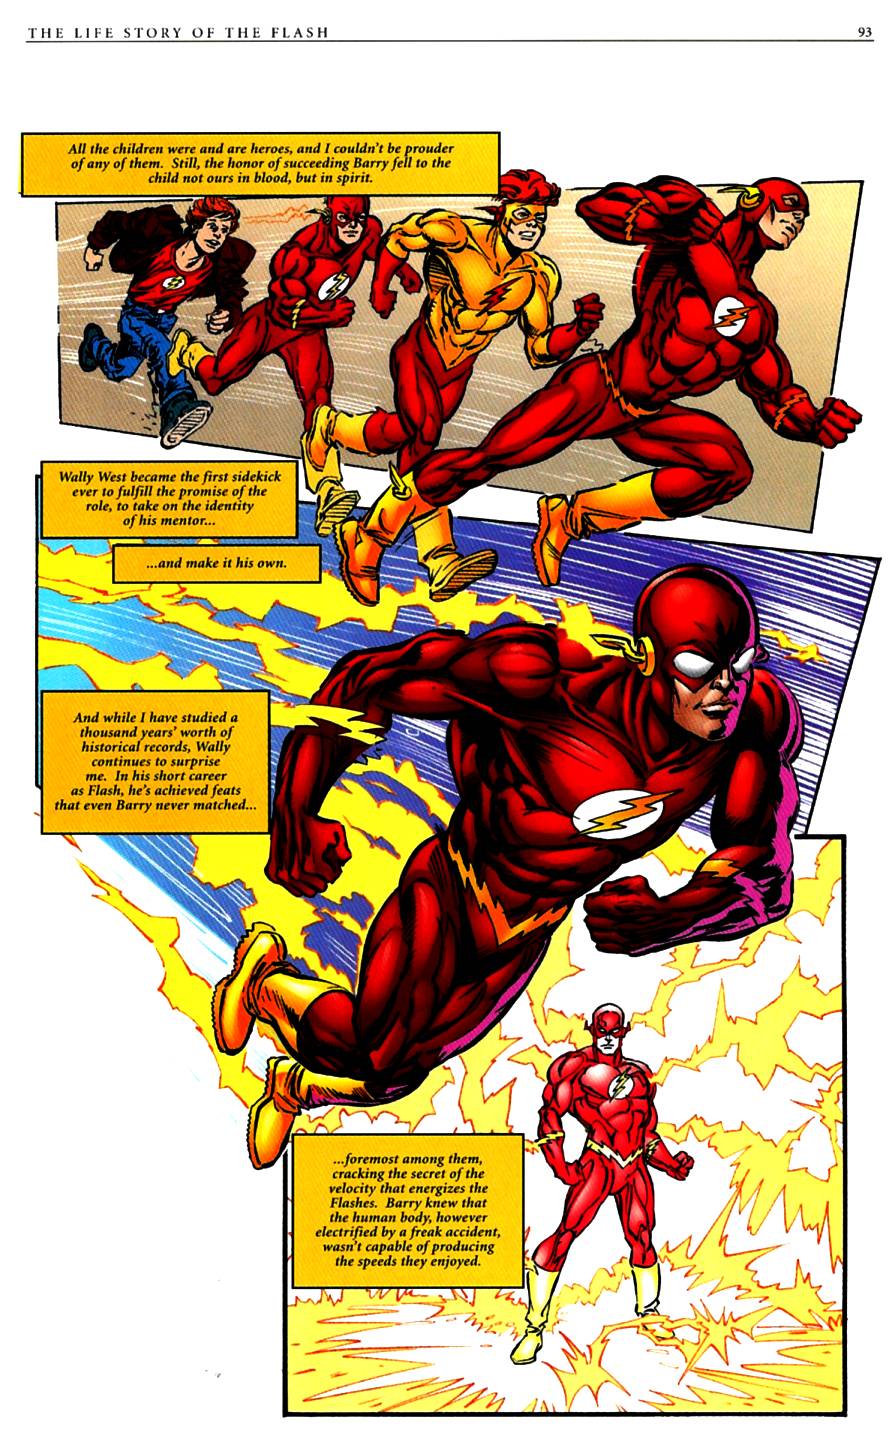 Read online The Life Story of the Flash comic -  Issue # Full - 95